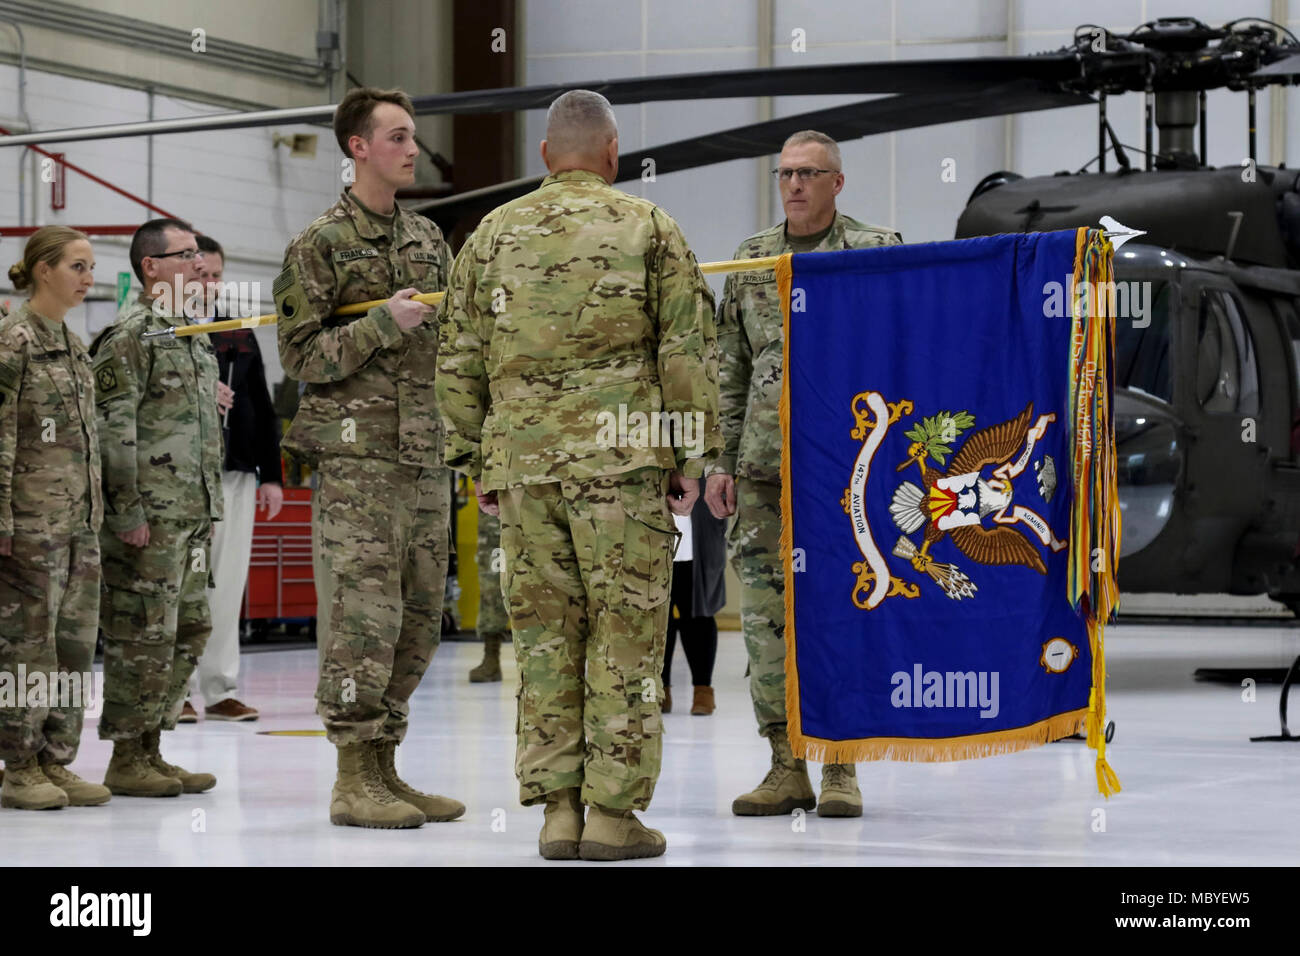 Lt. Col. Scott Bush and Command Sgt. Maj. Curtis Patrouille uncase the battalion colors for the Wisconsin Army National Guard’s 1st Battalion, 147th Aviation during a welcome-home ceremony Jan. 25 after a nine-month Middle East deployment. The unit provided UH-60M Black Hawk helicopter airlift assets and maintenance support personnel, flew 3,700 mission hours, conducted 69 medical evacuations, and transported more than 5,900 troops as well as approximately 200,000 pounds of cargo. Wisconsin National Guard Stock Photo